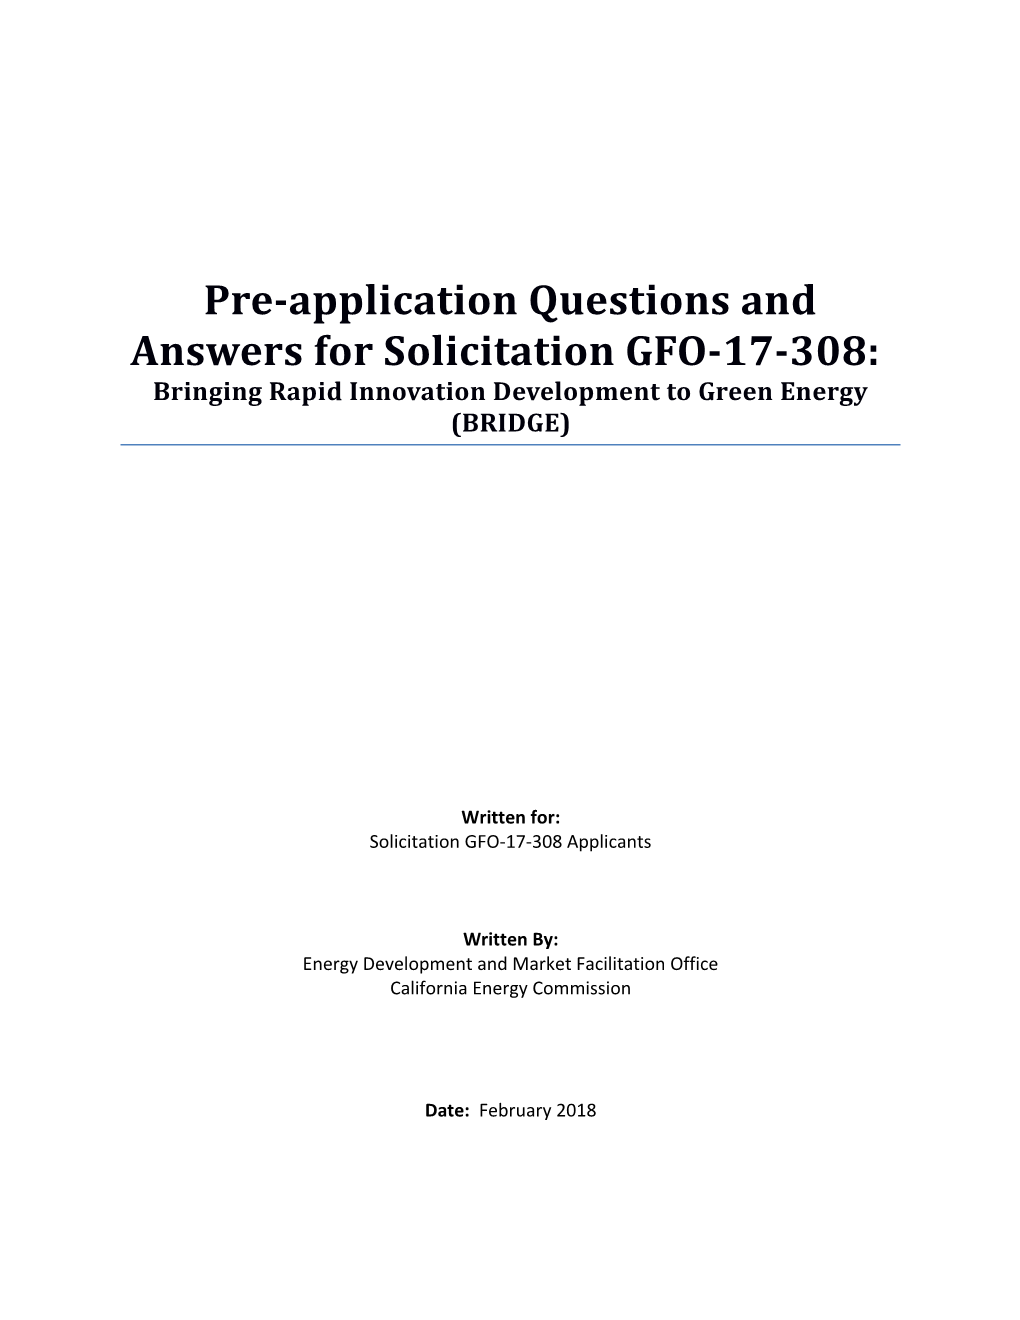 Pre-Application Questions and Answers for Solicitation GFO-17-308